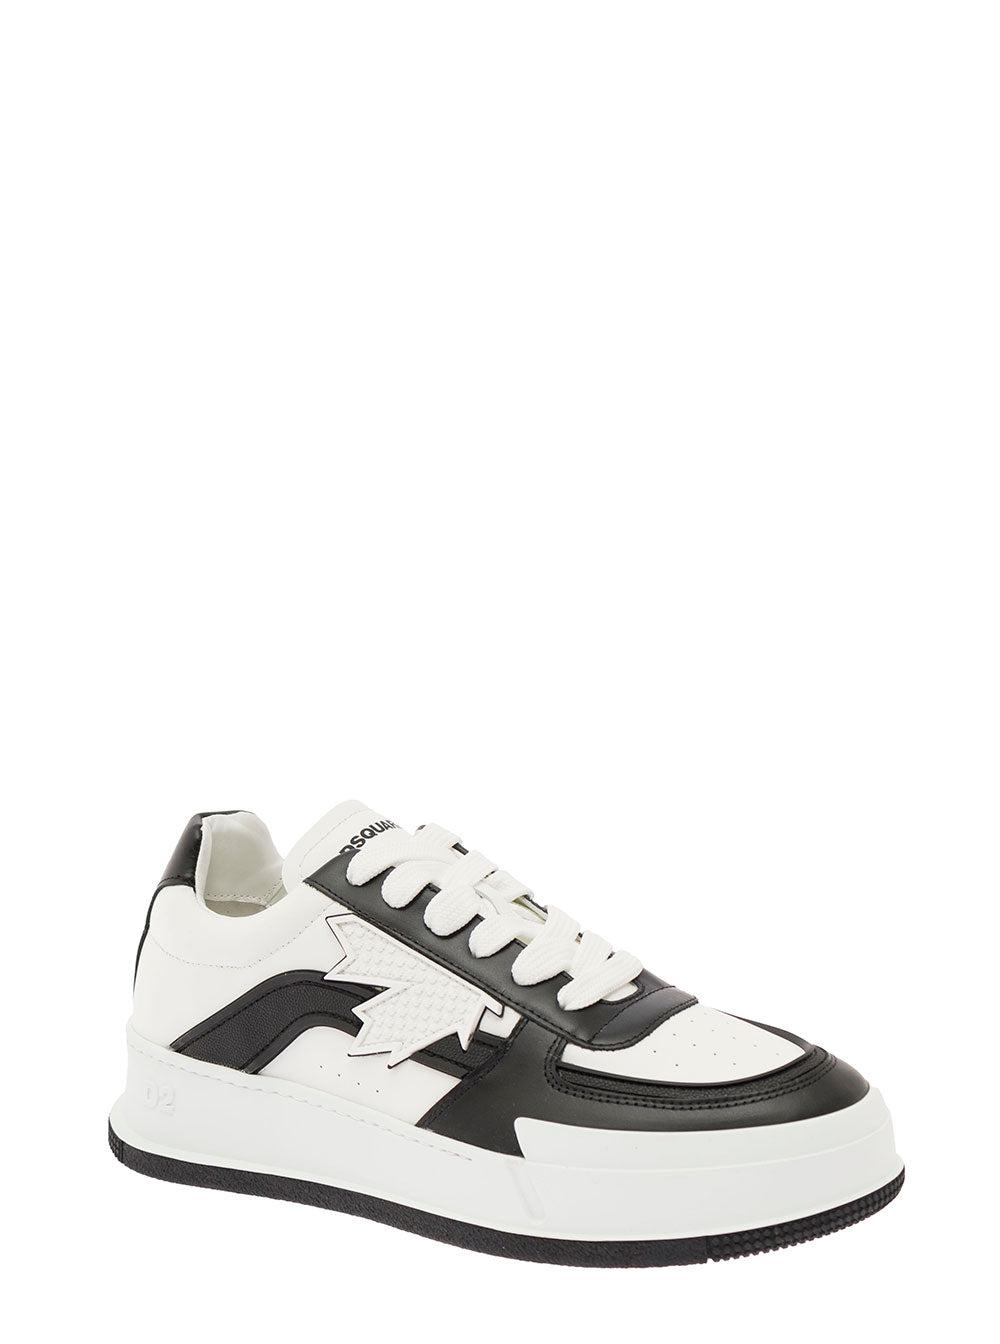 Save 15% Mens Trainers DSquared² Trainers DSquared² Leather Canadian Grey Black Hi-top Sneaker in White for Men 